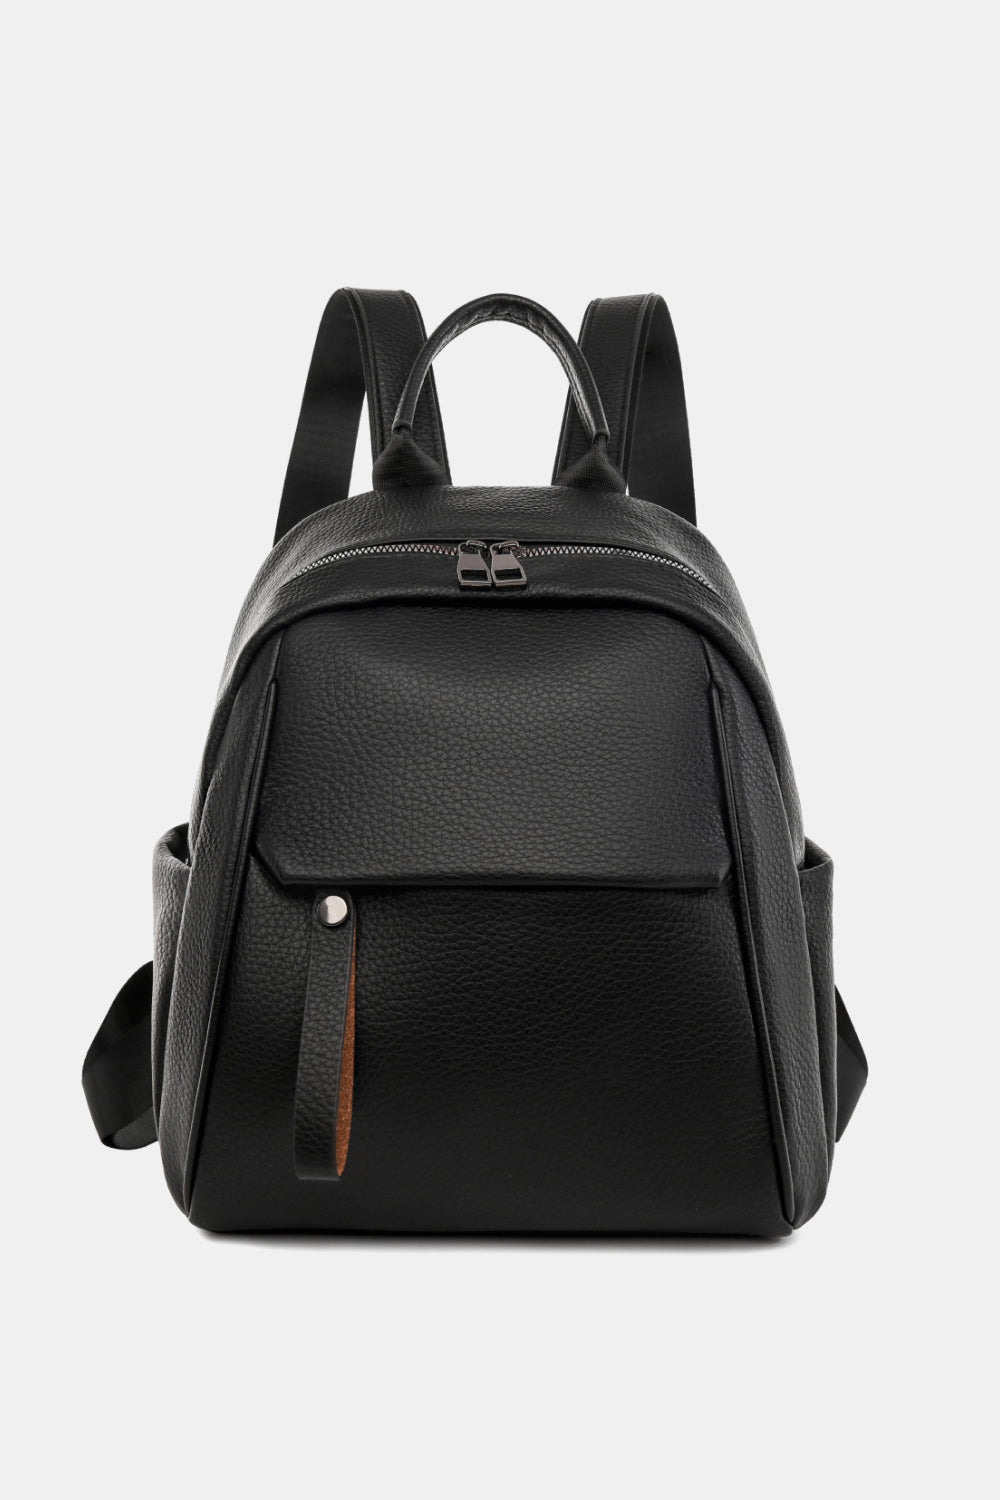 Medium PU Leather Backpack Print on any thing USA/STOD clothes